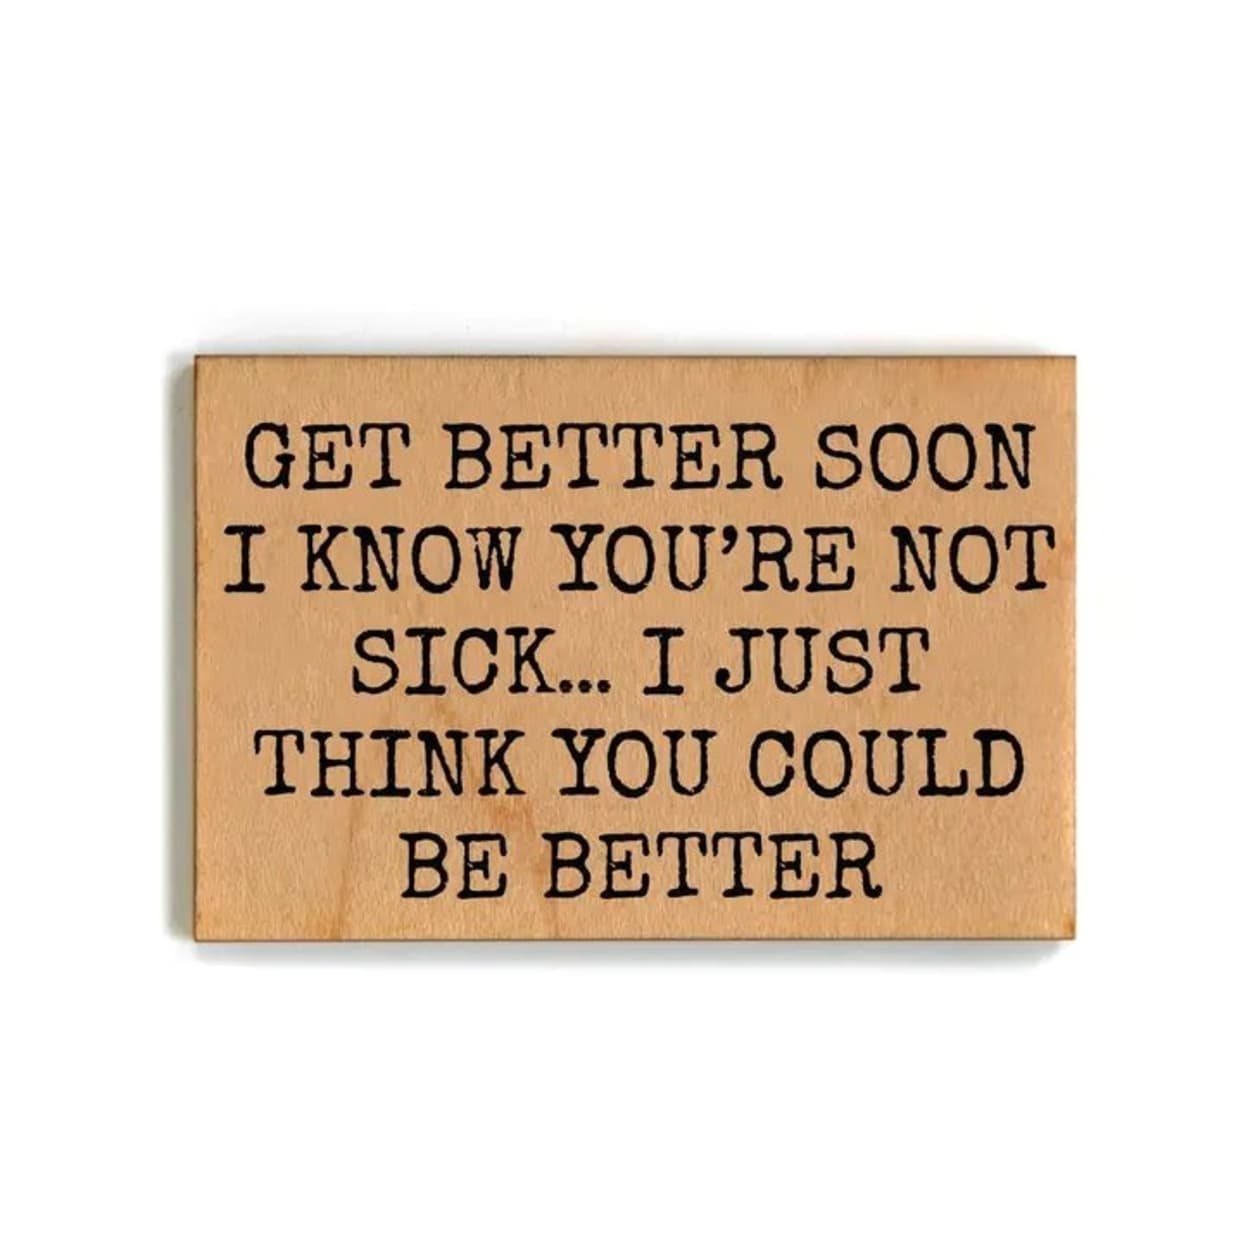 Get Better Soon (I Know You're Not Sick...I Just Think You Could Be Better) Funny Wood Refrigerator Magnet | 2" x 3"